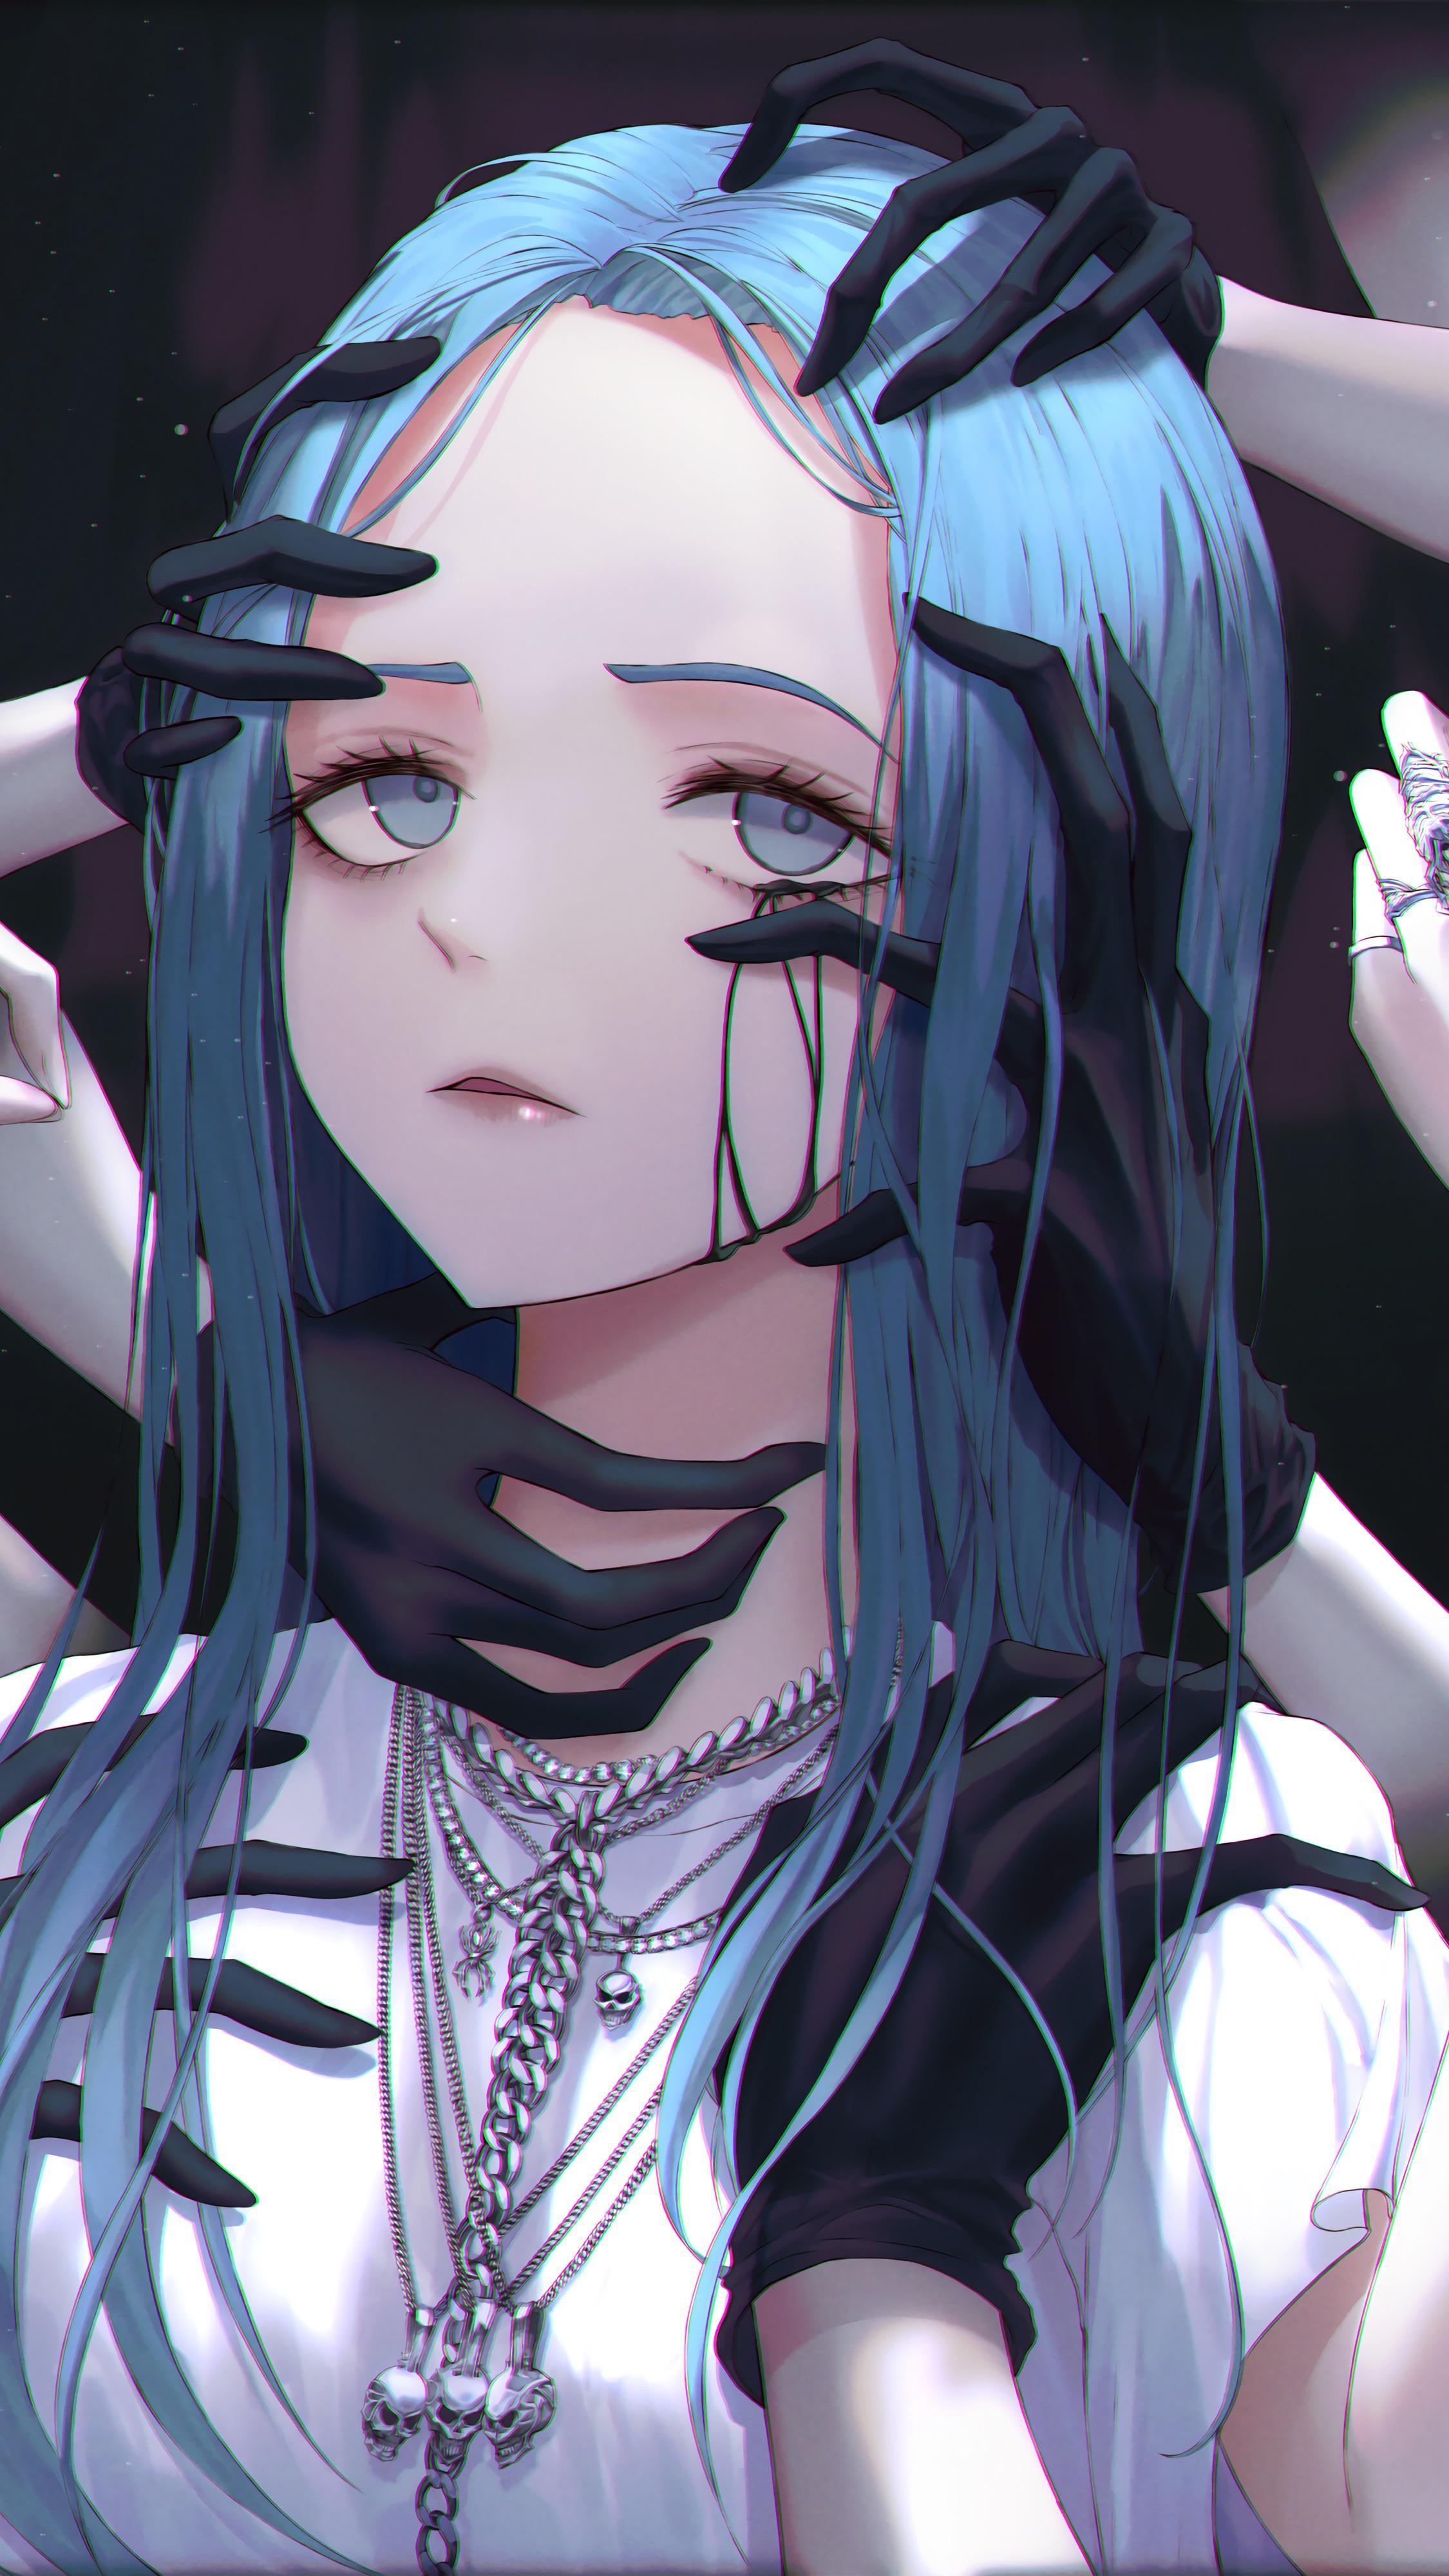 Billie Eilish releases her new single My Future featuring her anime  version